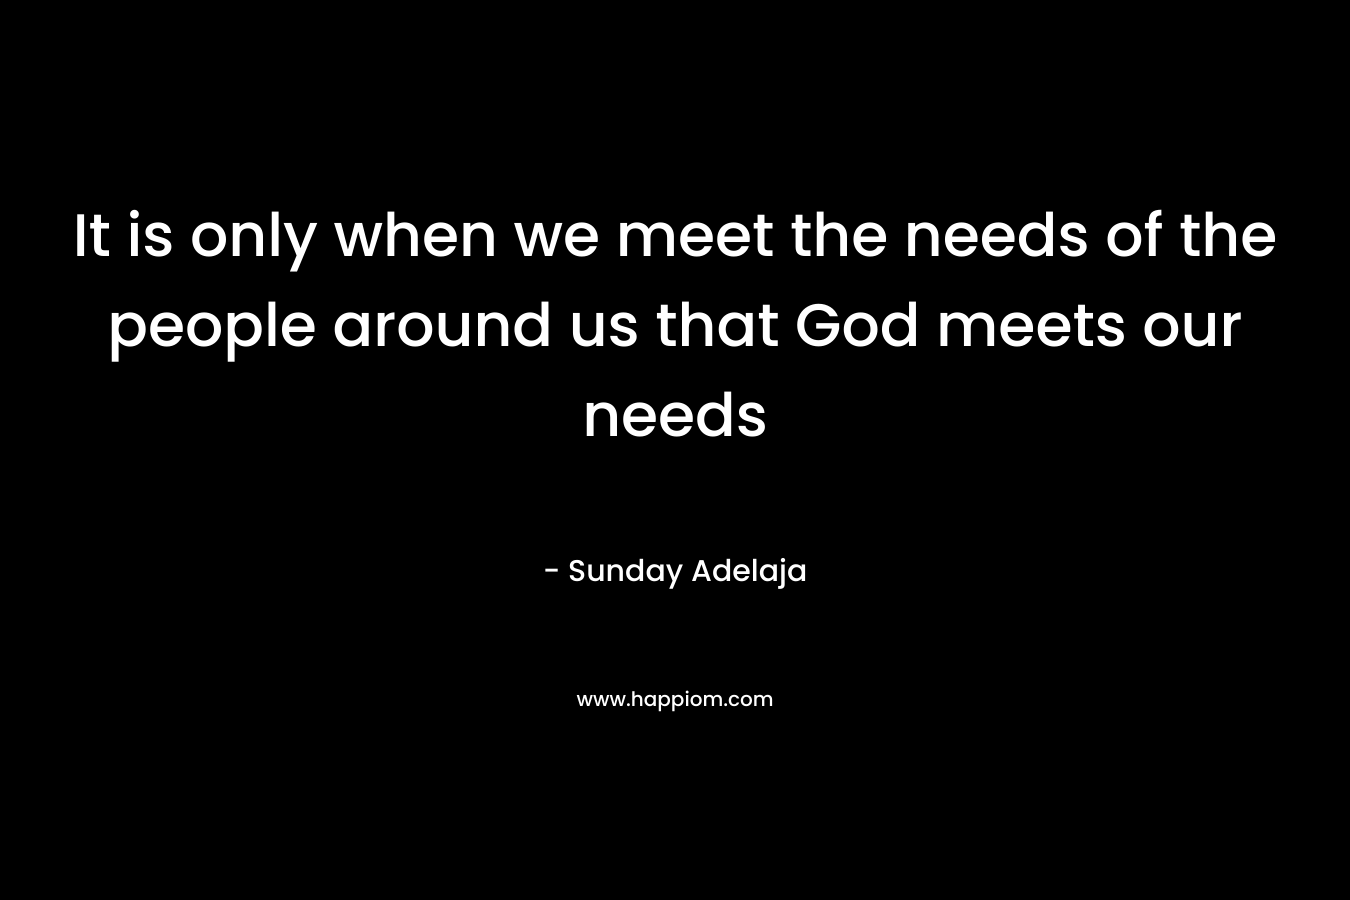 It is only when we meet the needs of the people around us that God meets our needs